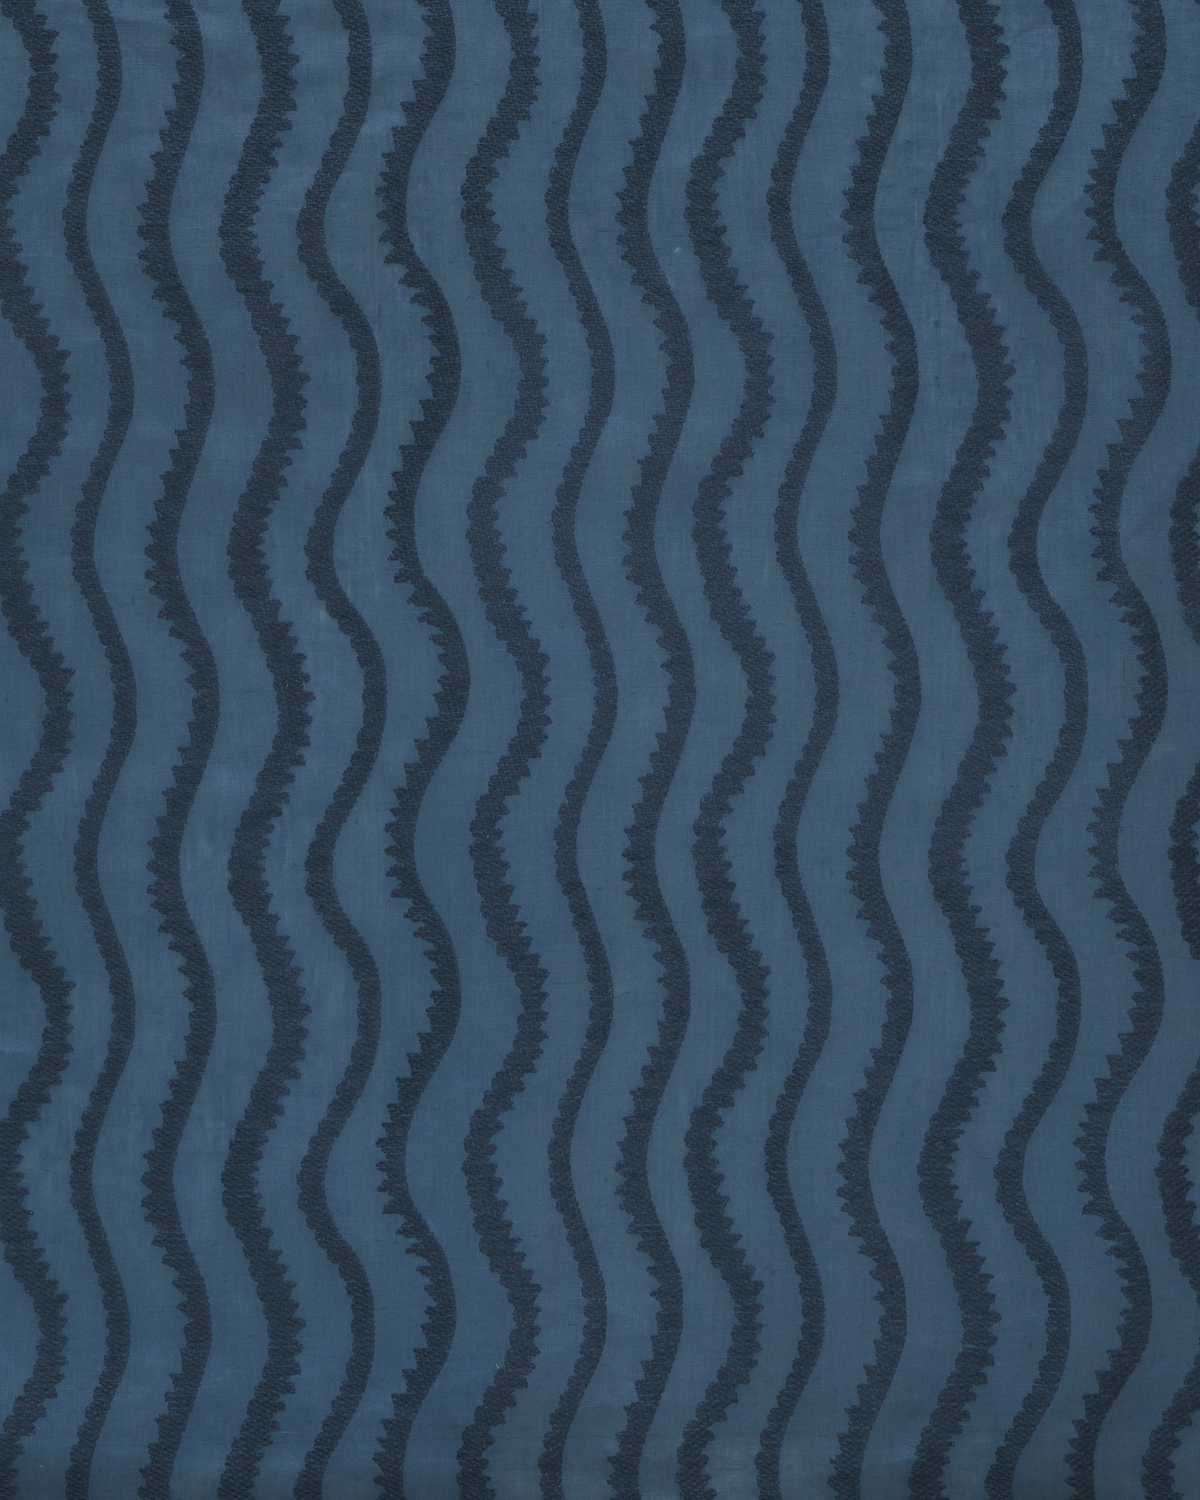 Notched Vines Fabric in Washed Navy